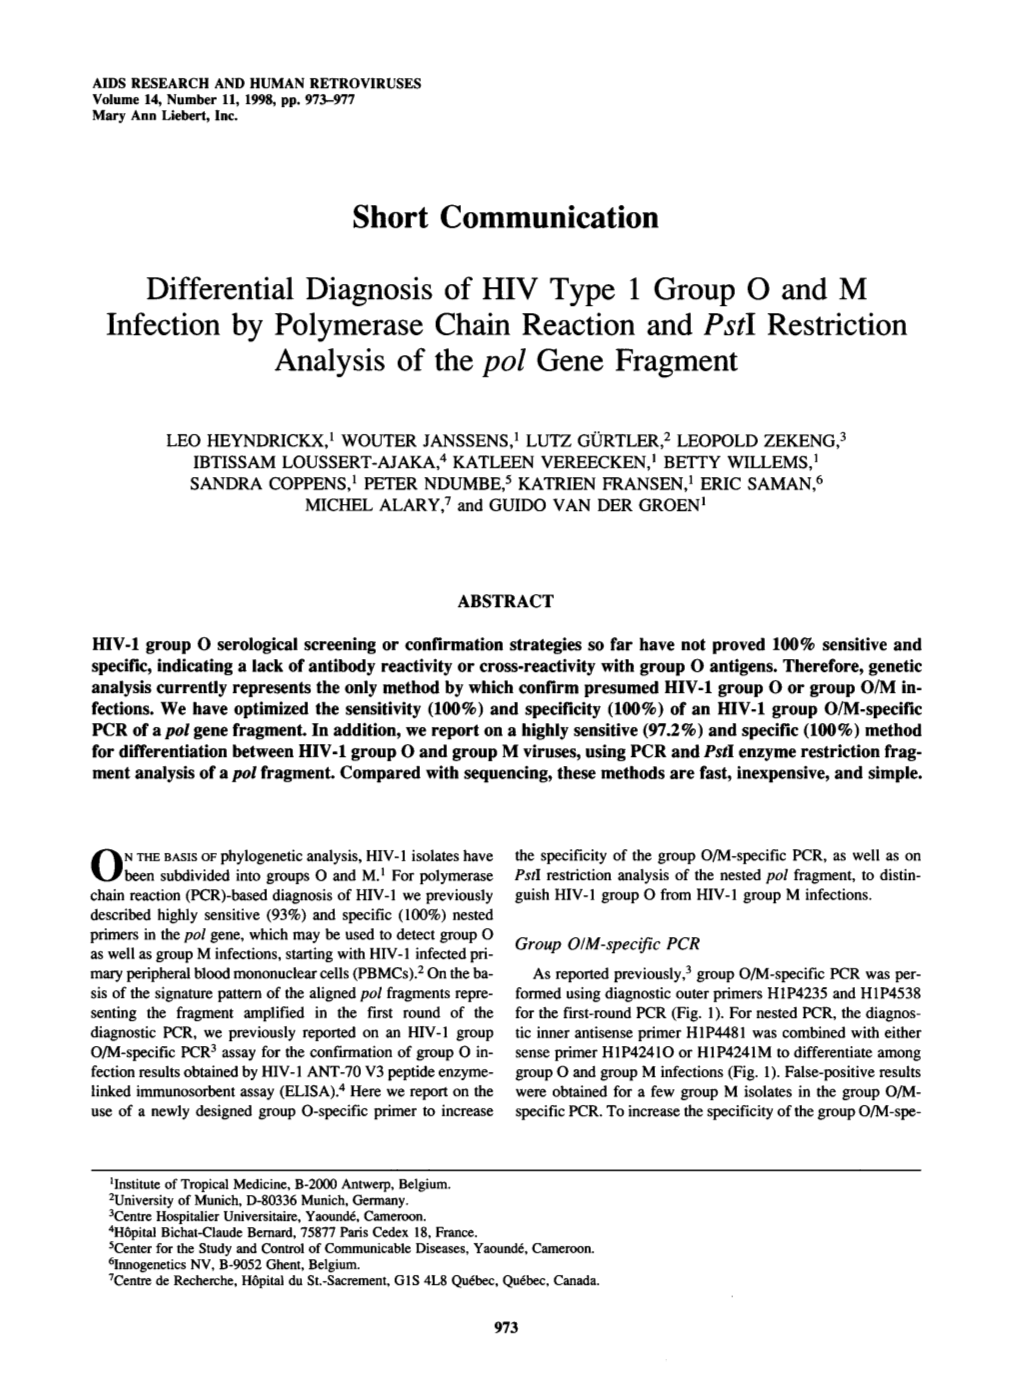 Differential Diagnosis of HIV Type 1 Group O and M Infection by Polymerase Chain Reaction and Pstl Restriction Analysis of the Pol Gene Fragment